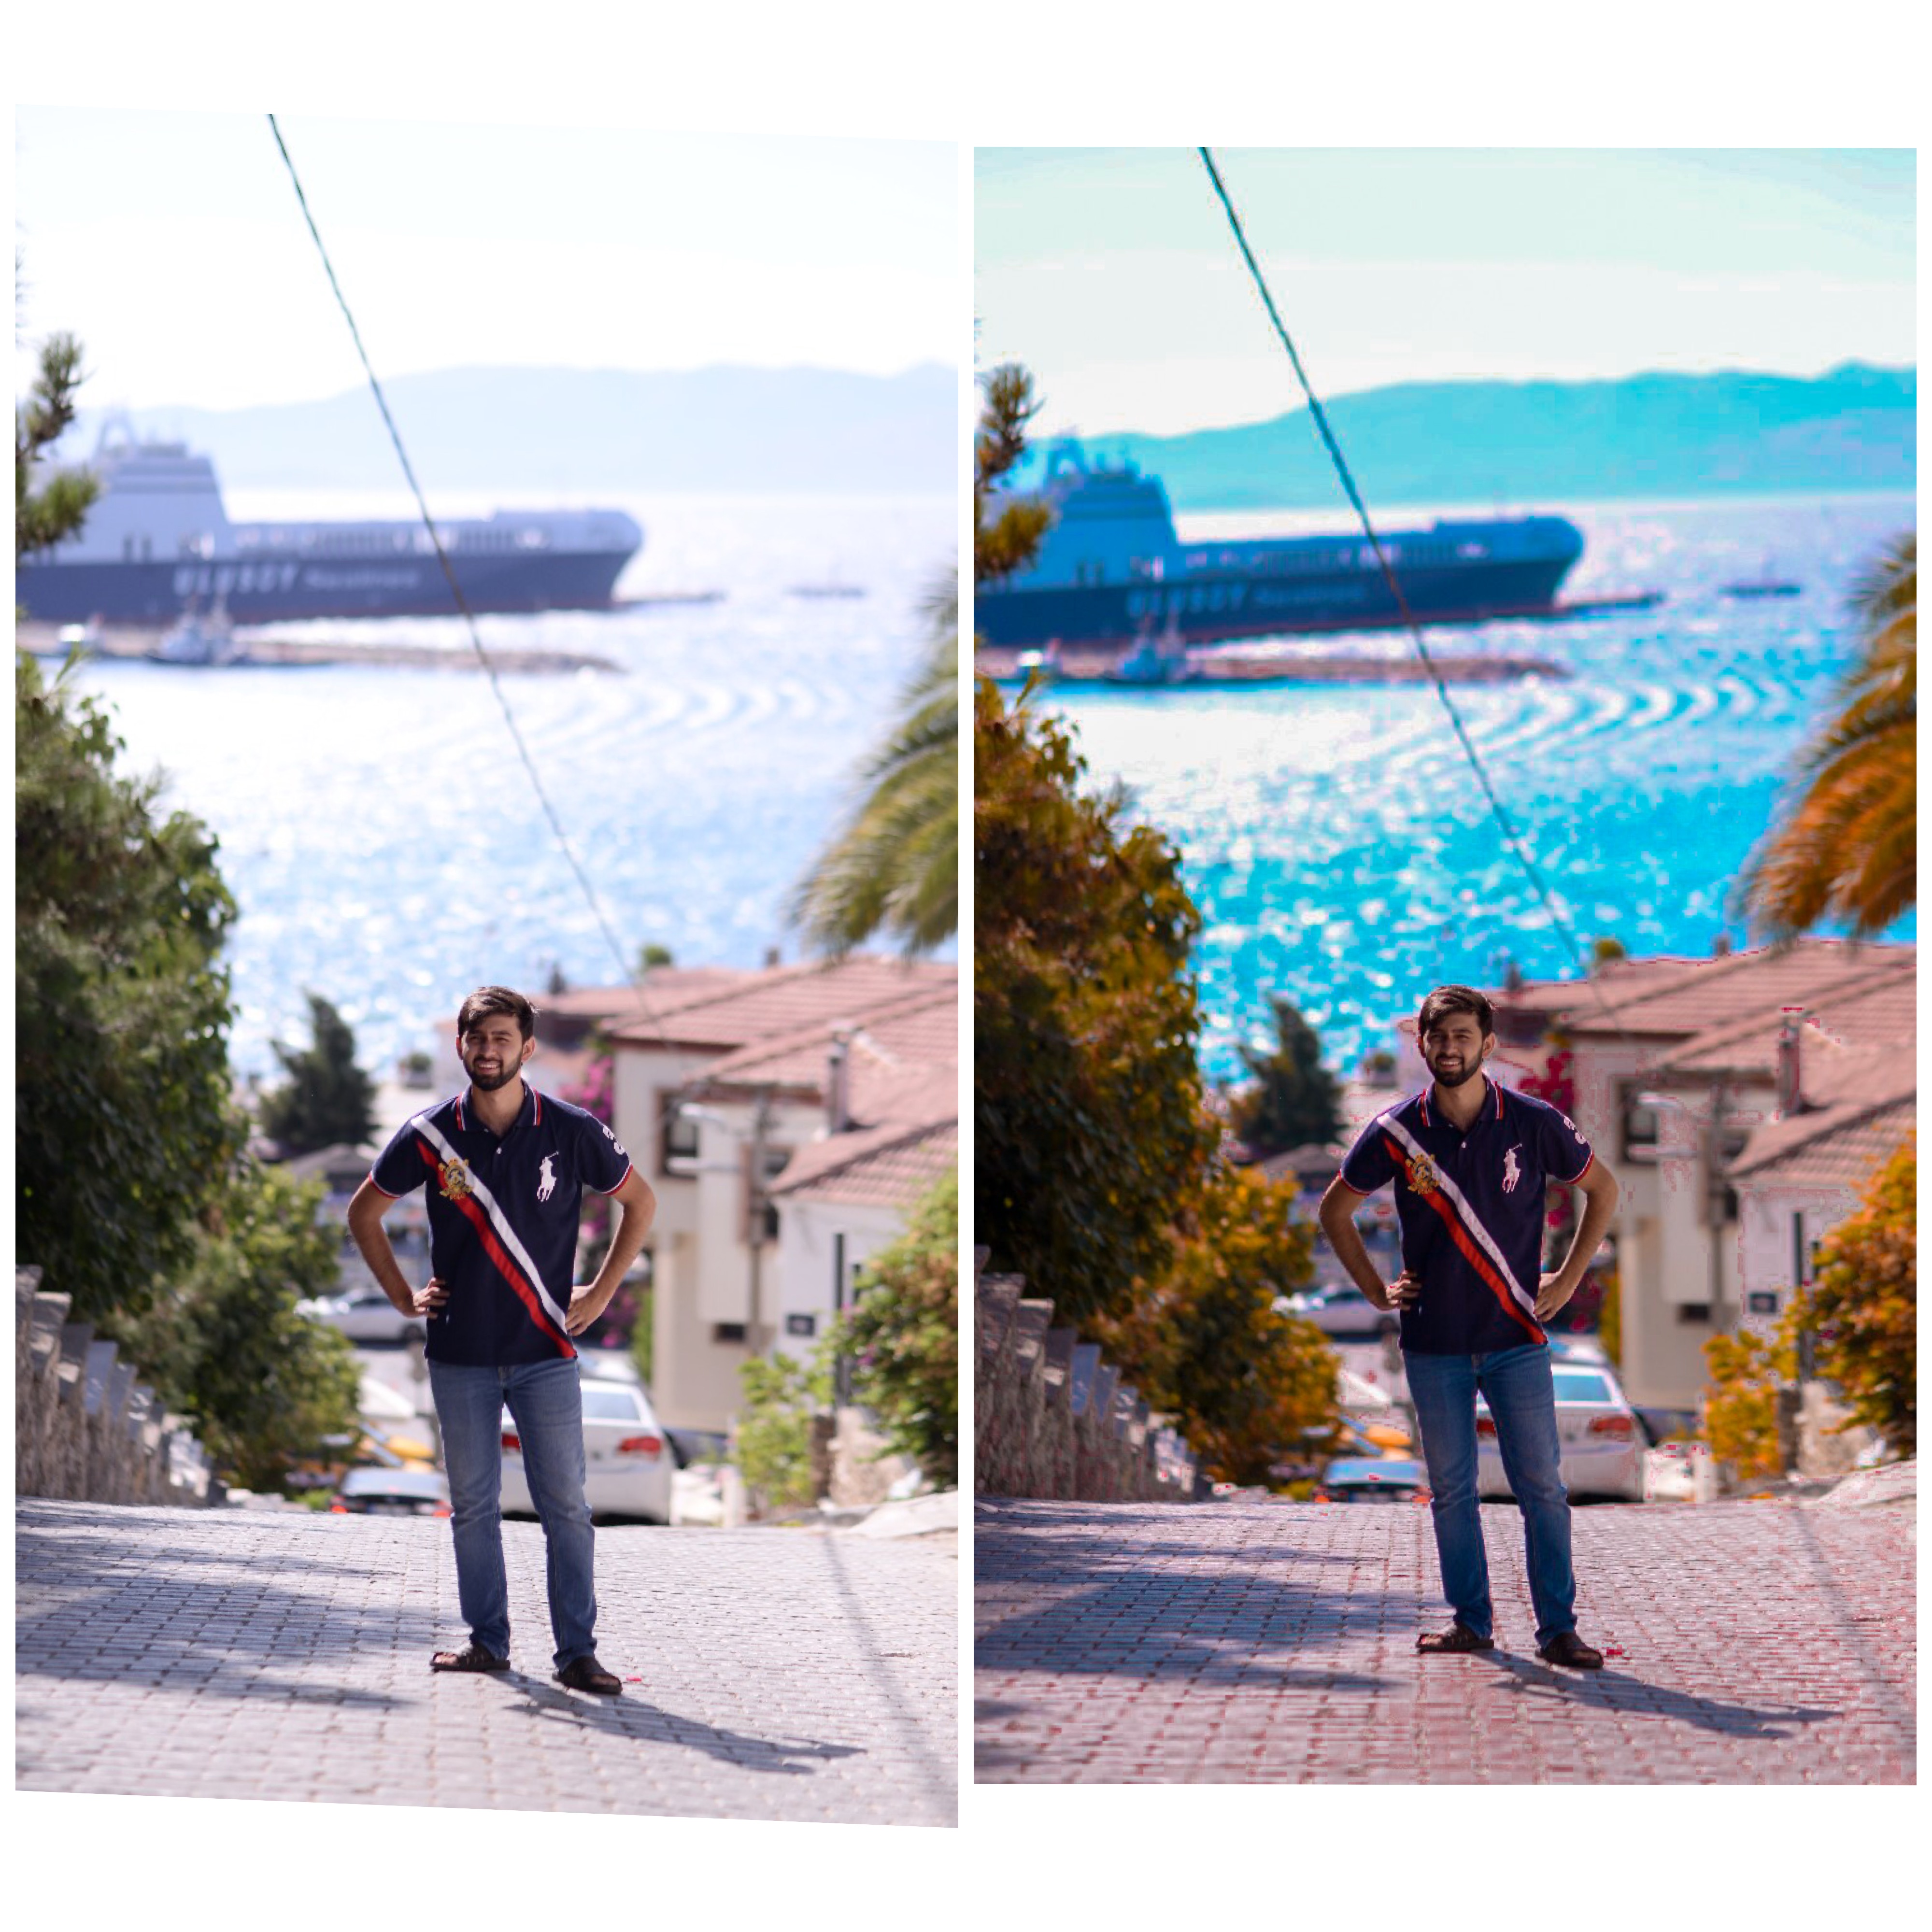 Edit pictures on Adobe Photoshop and Lightroom for Instagram and color correction